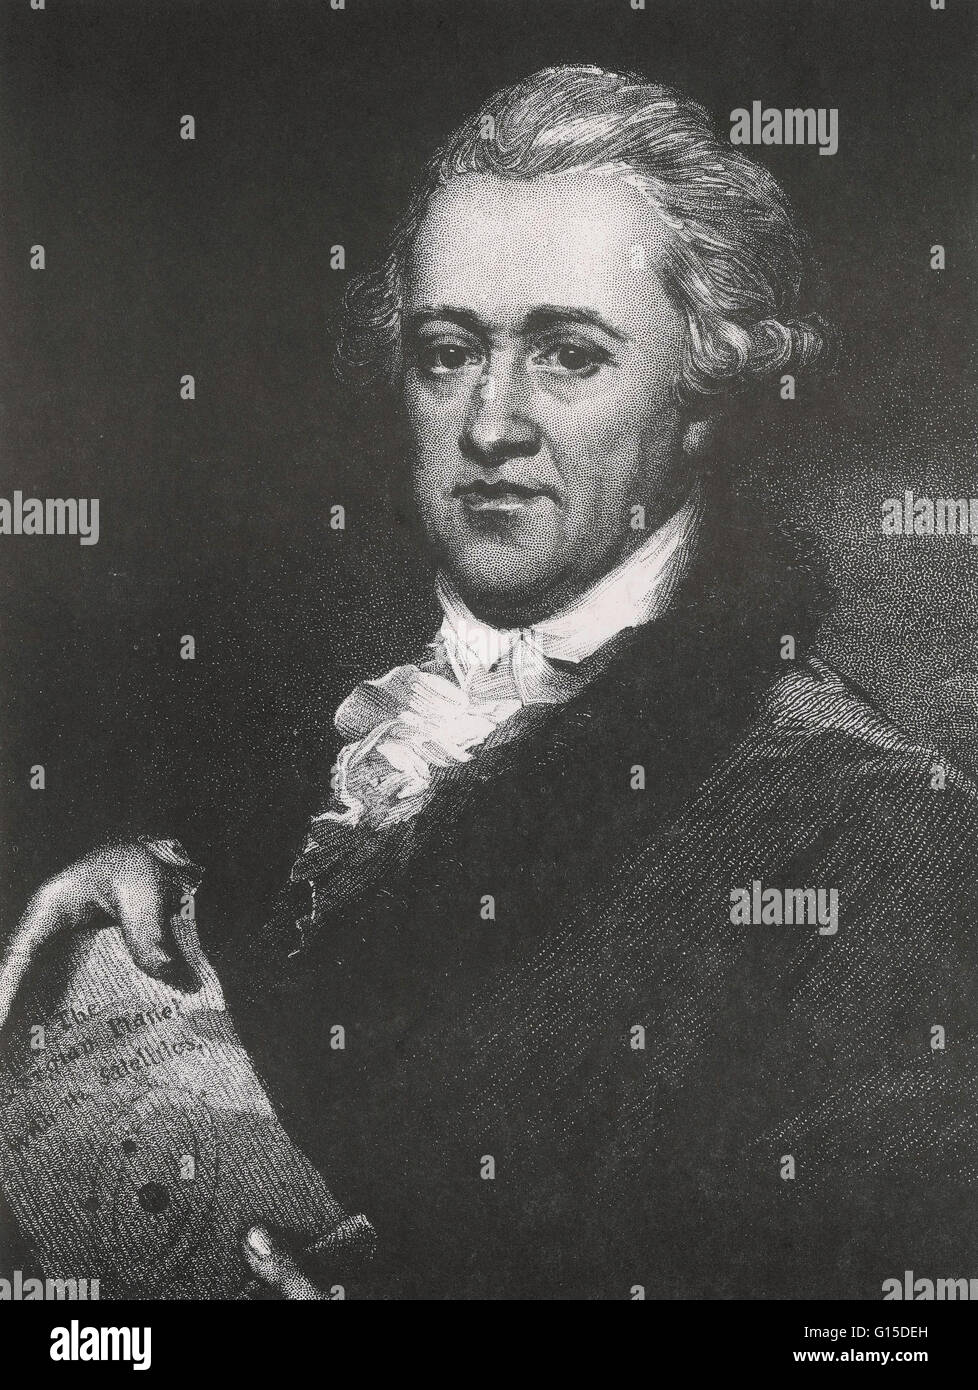 English astronomer Sir Frederick William Herschel (1738-1822). Herschel became most famous for the discovery of the planet Uranus in addition to several of its major moons such as Titania and Oberon. He also discovered infrared radiation. Stock Photo